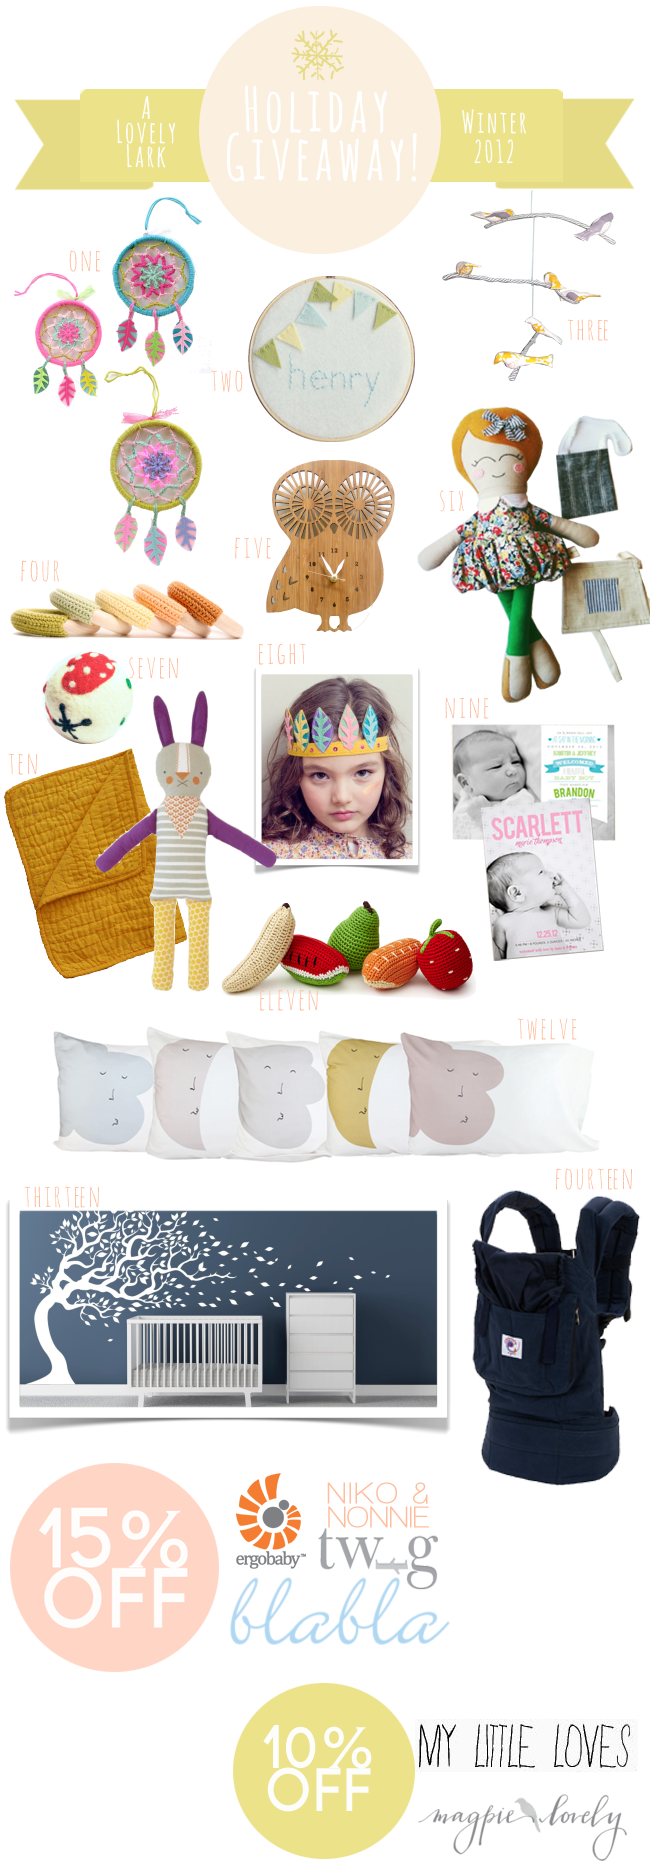 a-lovely-lark-holiday-giveaway-2012